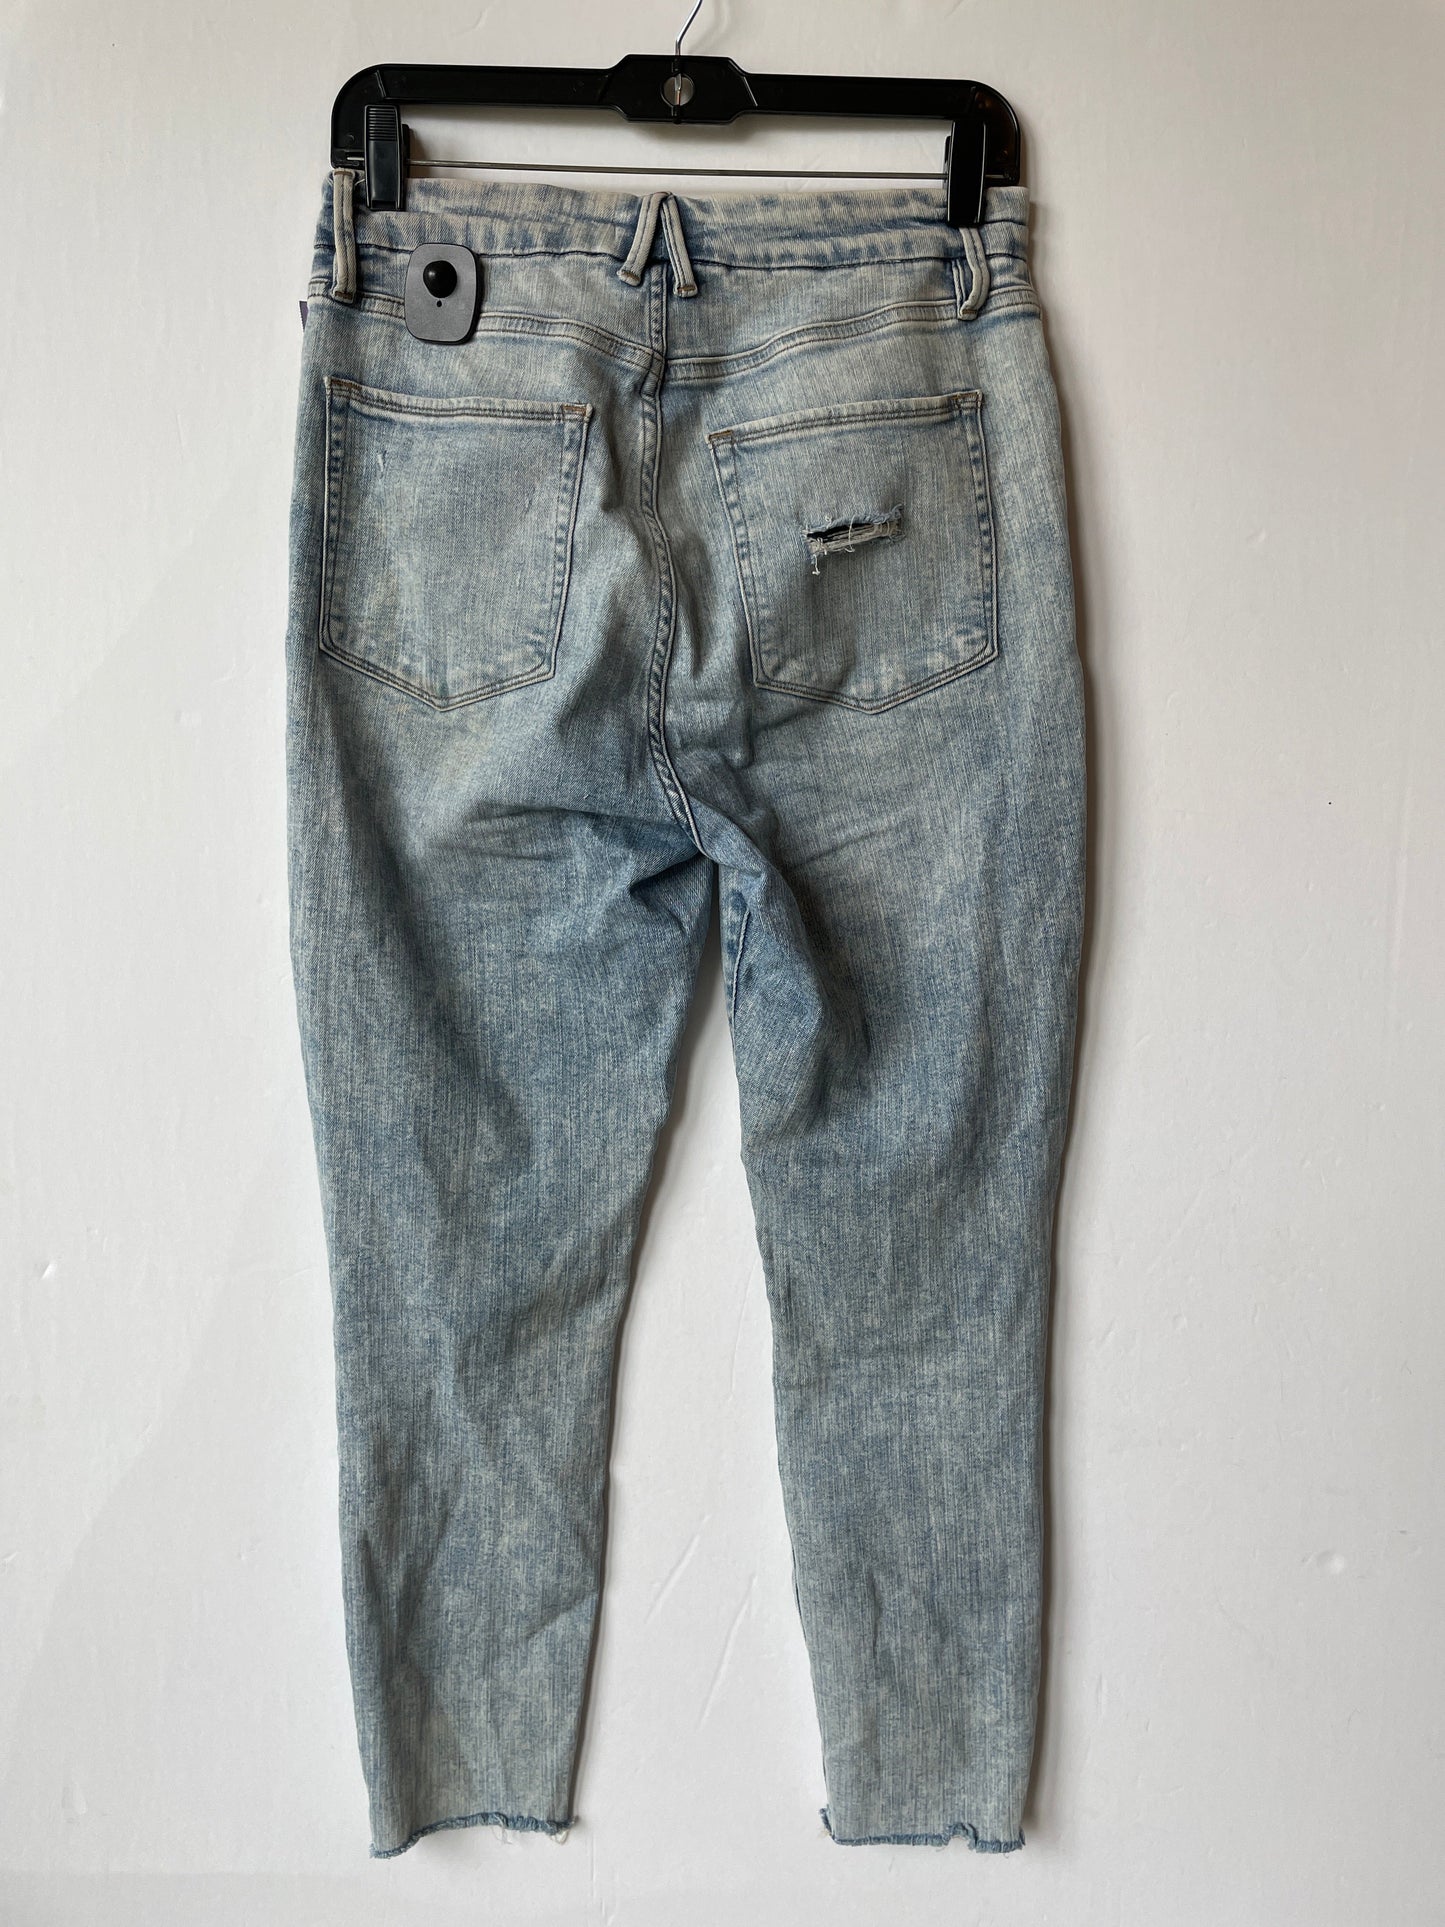 Jeans Skinny By Good American  Size: 12